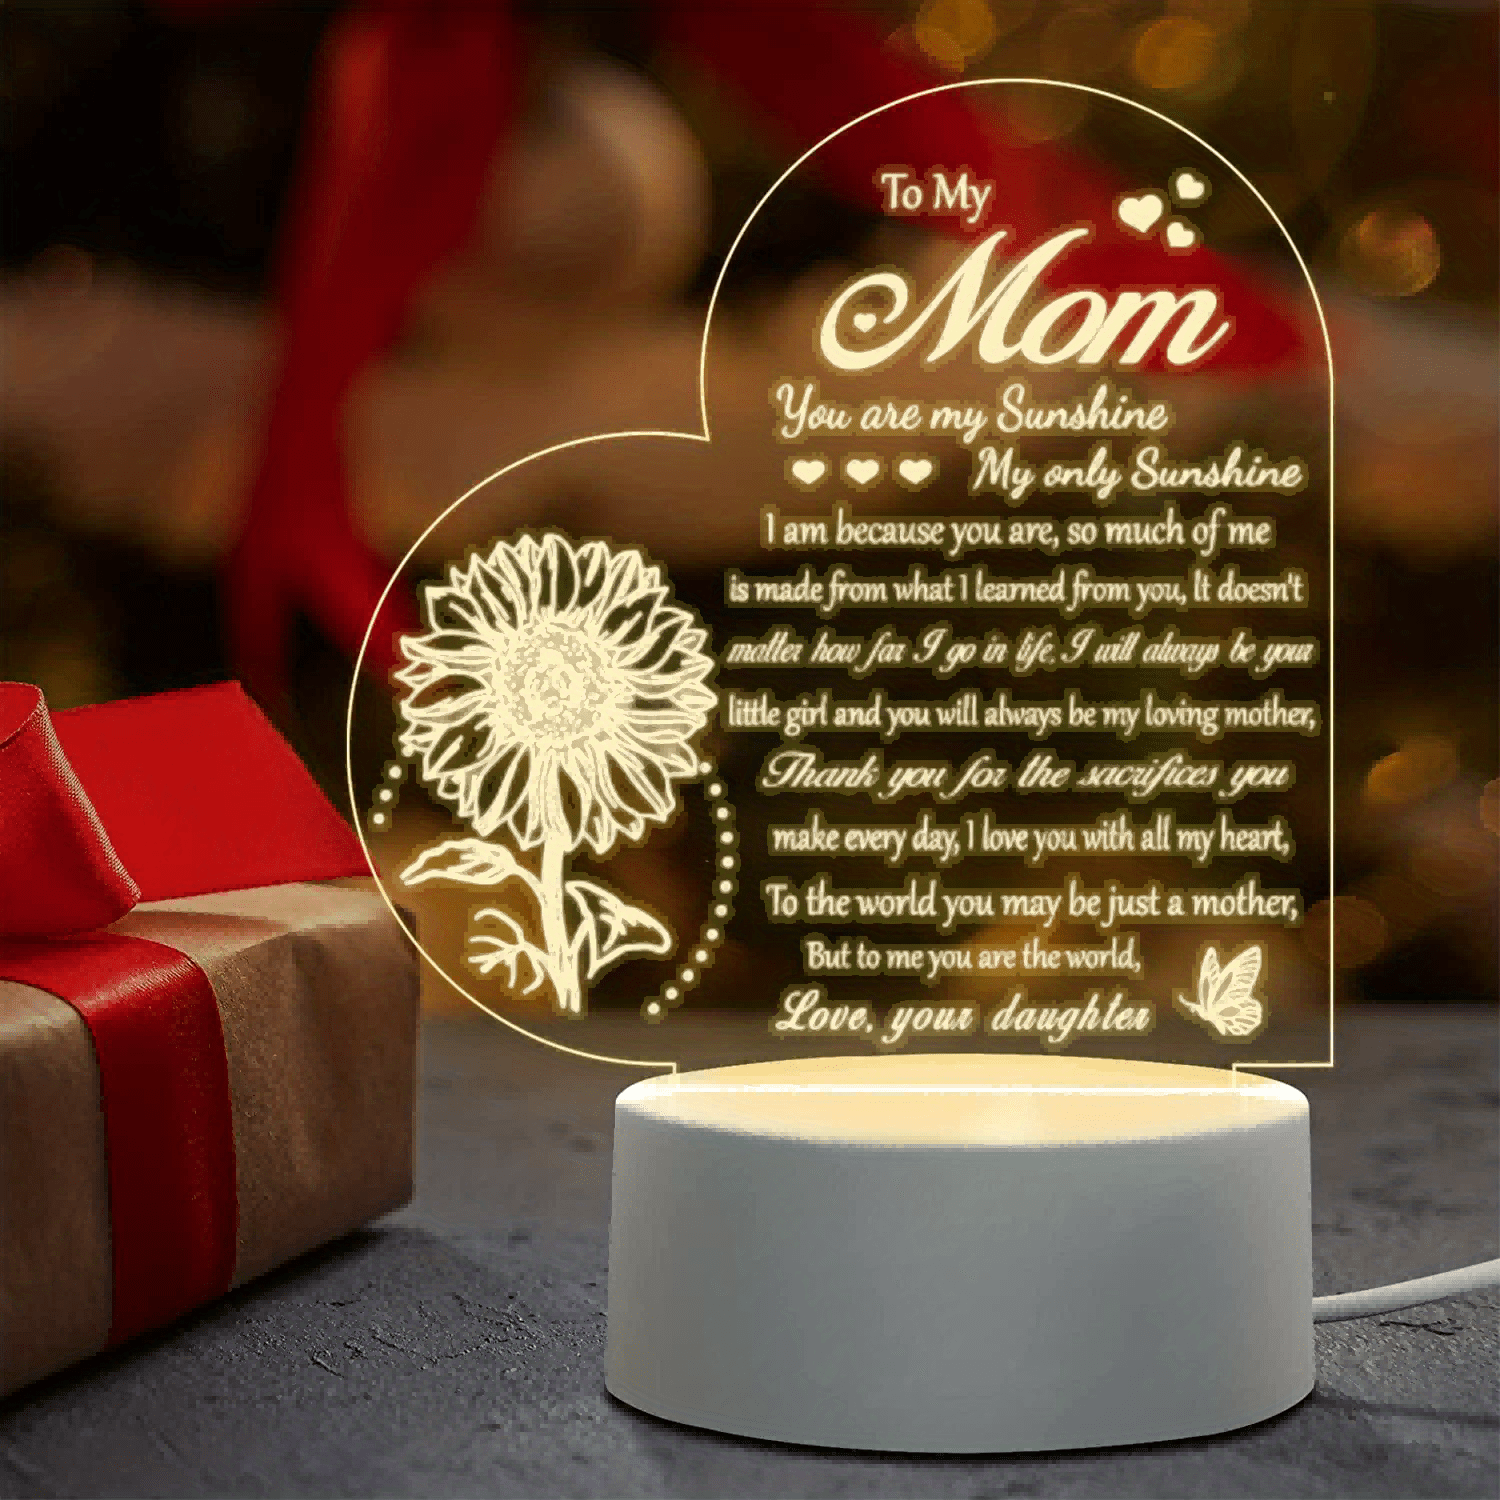 Personalized Gifts For Mom, Good Gifts For Mom Birthday, Mother's Day Gift  Id